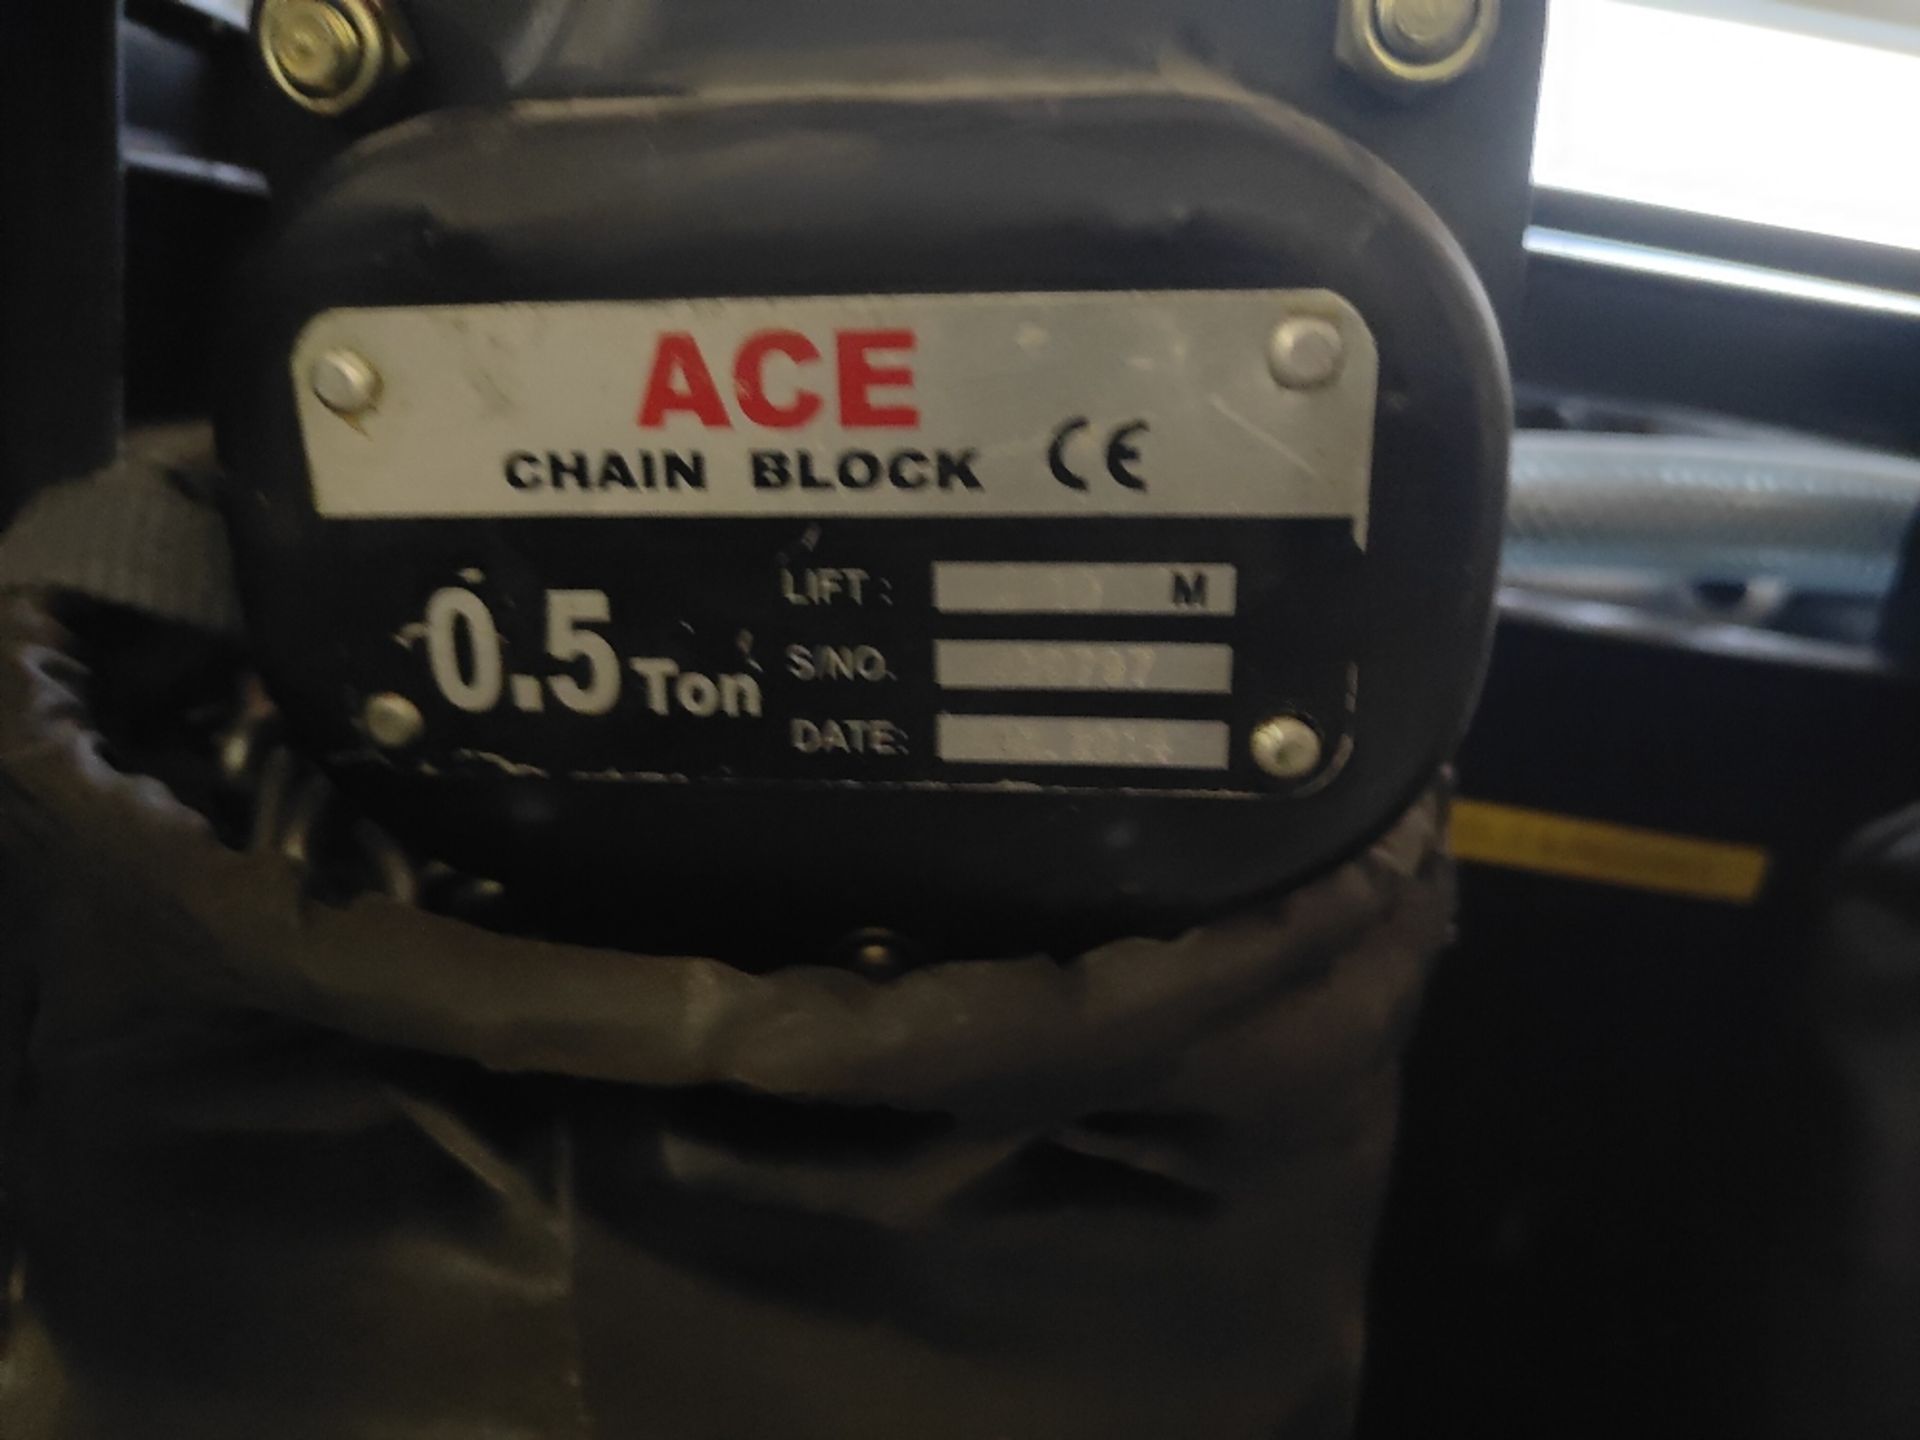 Lifting Equipment - To Include: (2) Ace 0.5 Ton Chain Blocks, Lifting Straps & Cables, Ropes - Image 2 of 6